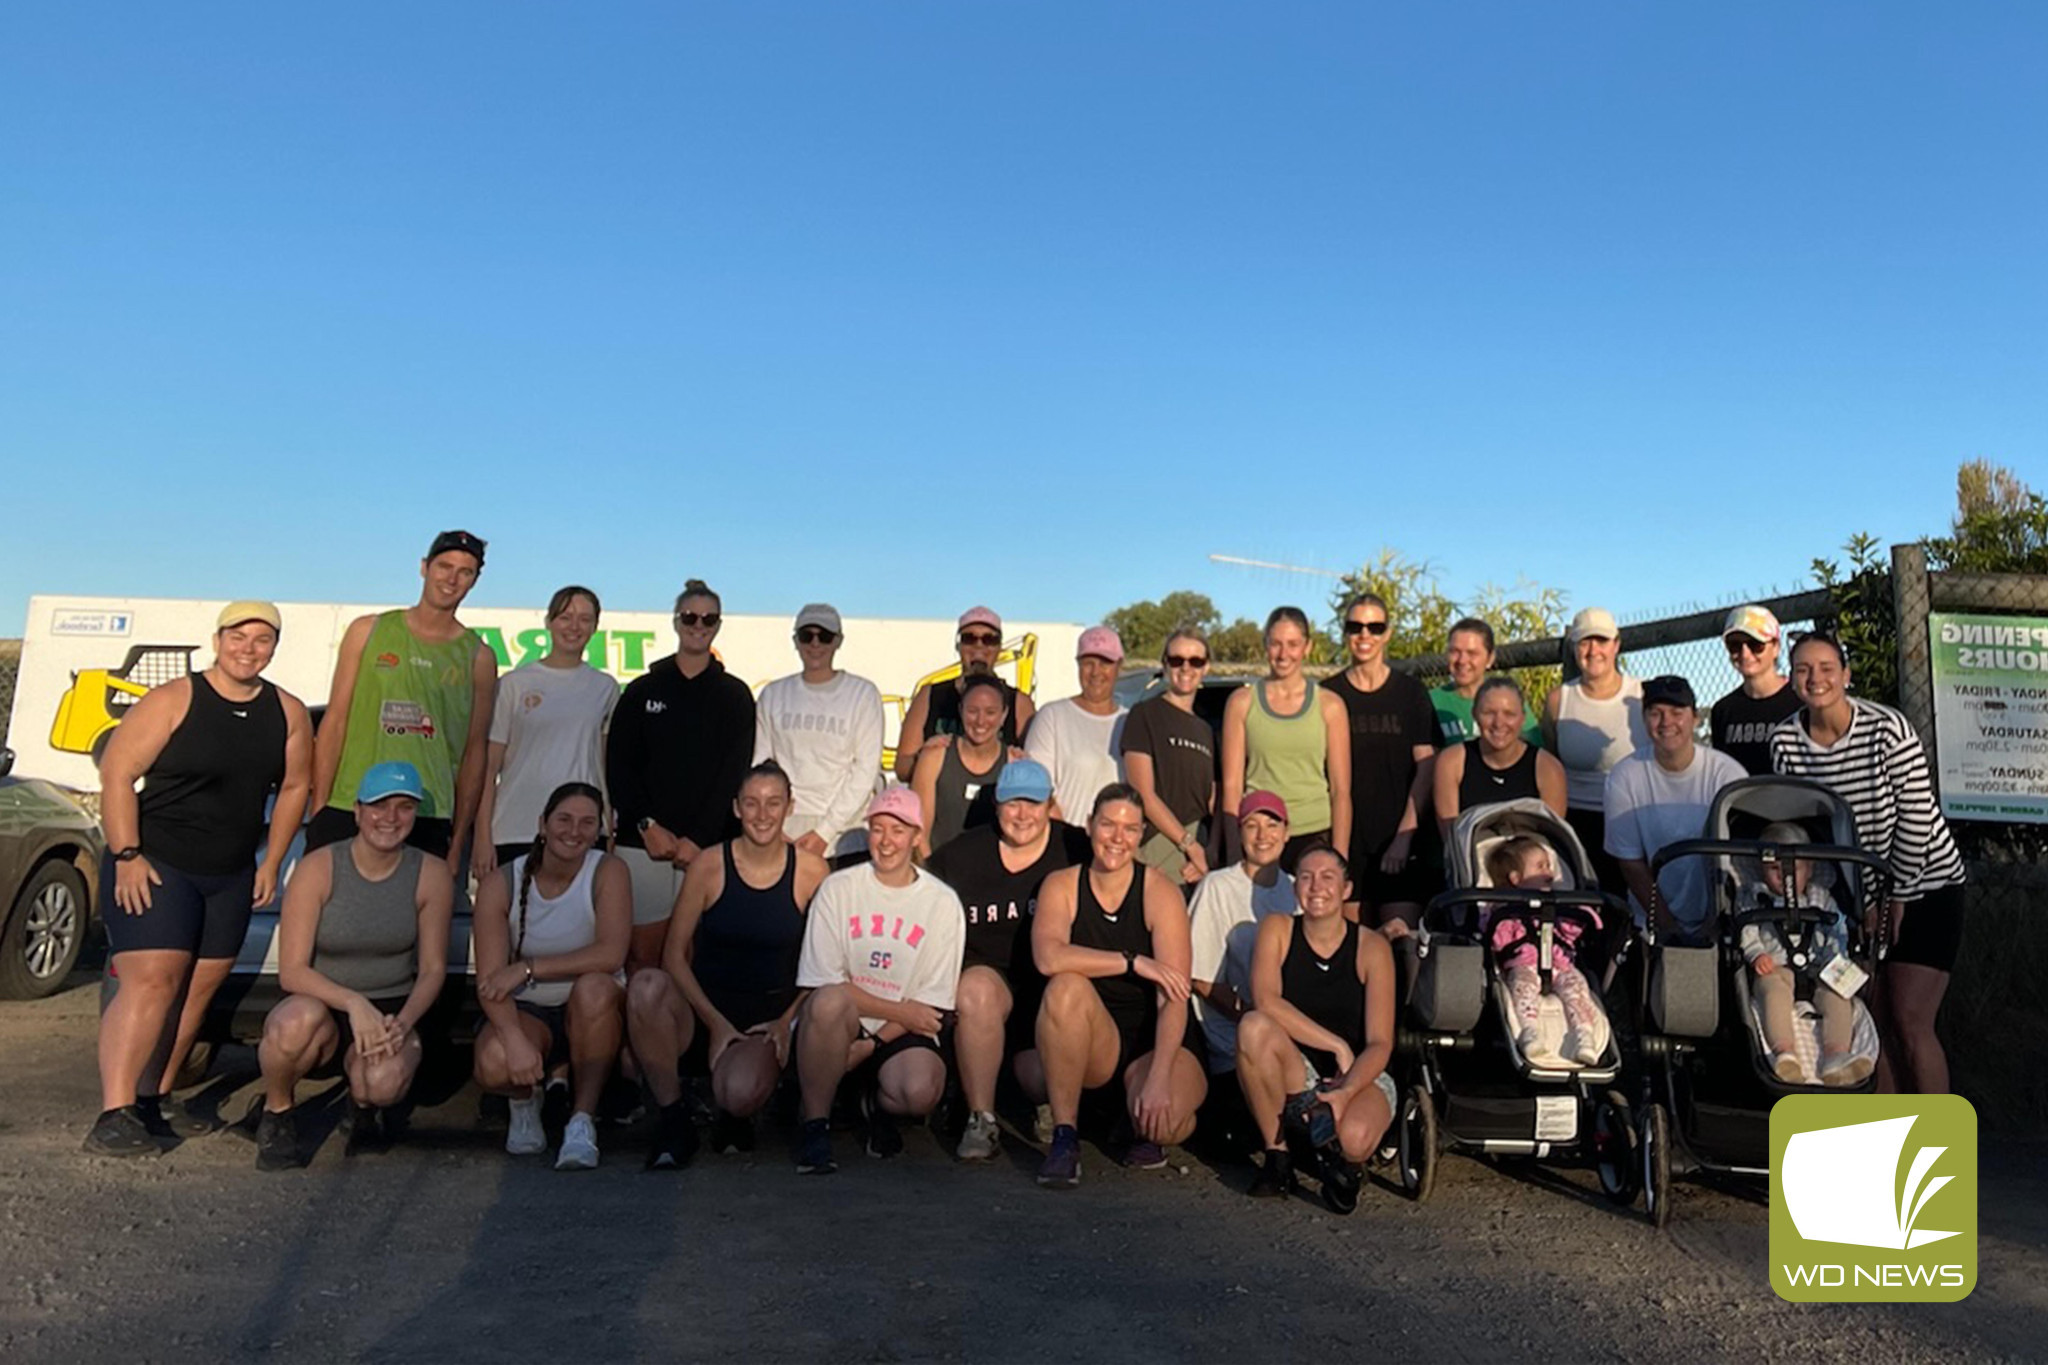 Better together: Around 45 people have attended the running sessions this month, with 28 pounding the pavement during the first Saturday to help raise awareness for men’s mental health.